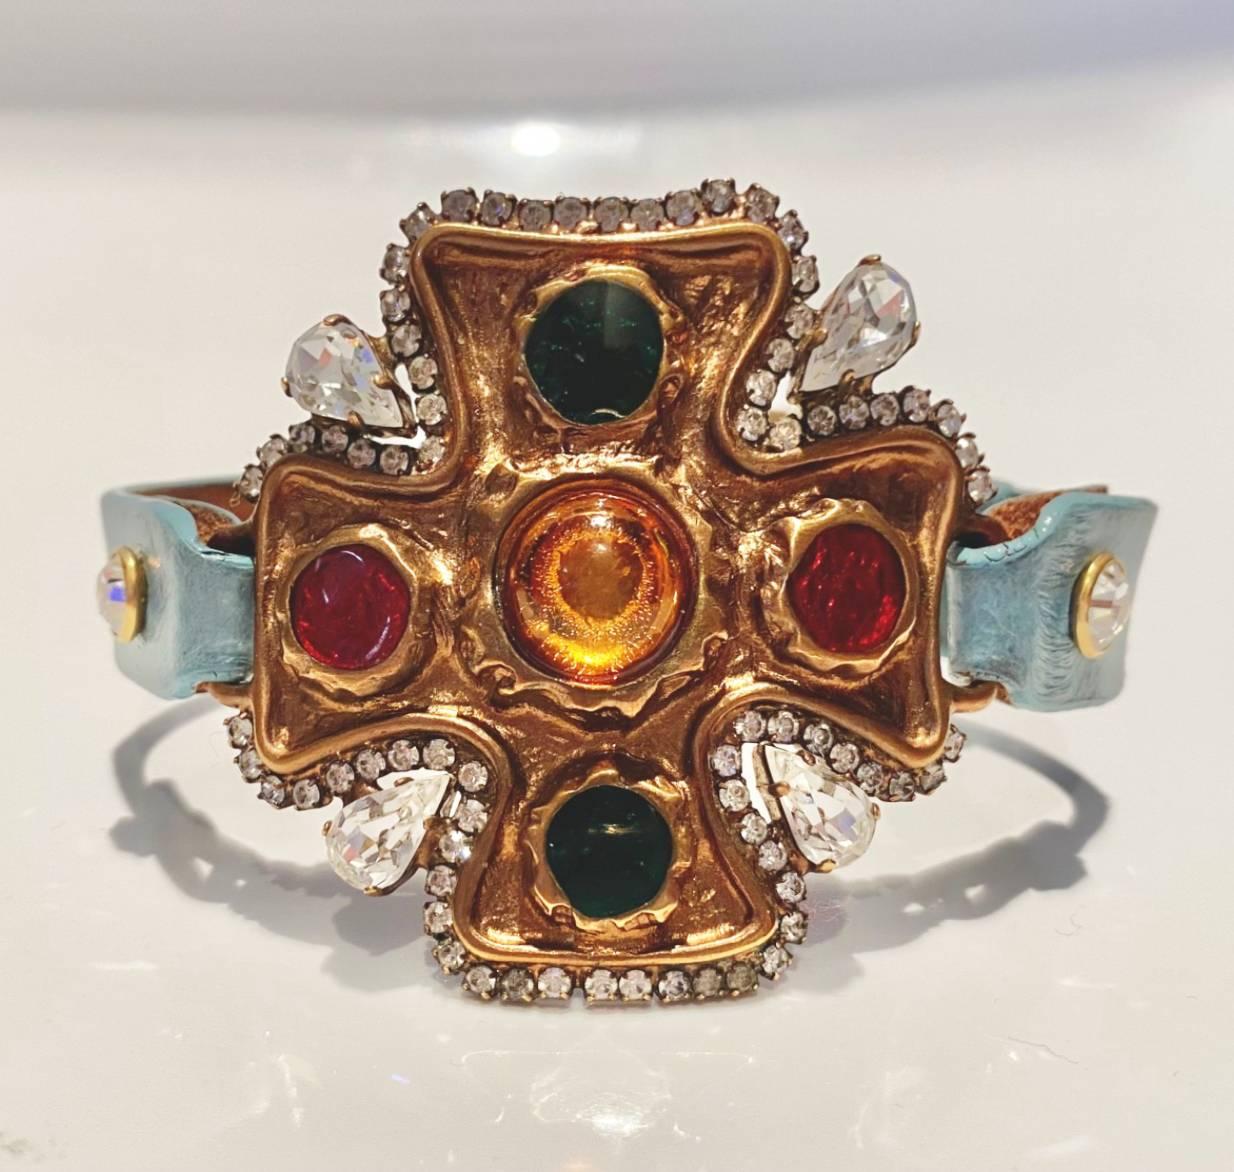 Dolce & Gabbana bracelet featuring frontal flower shaped brass structure embellished with multicolor stones and crystals, aqua color leather strap with gold tone metalware closure and logo initial details

Condition: 2000s, very good, slight wear,